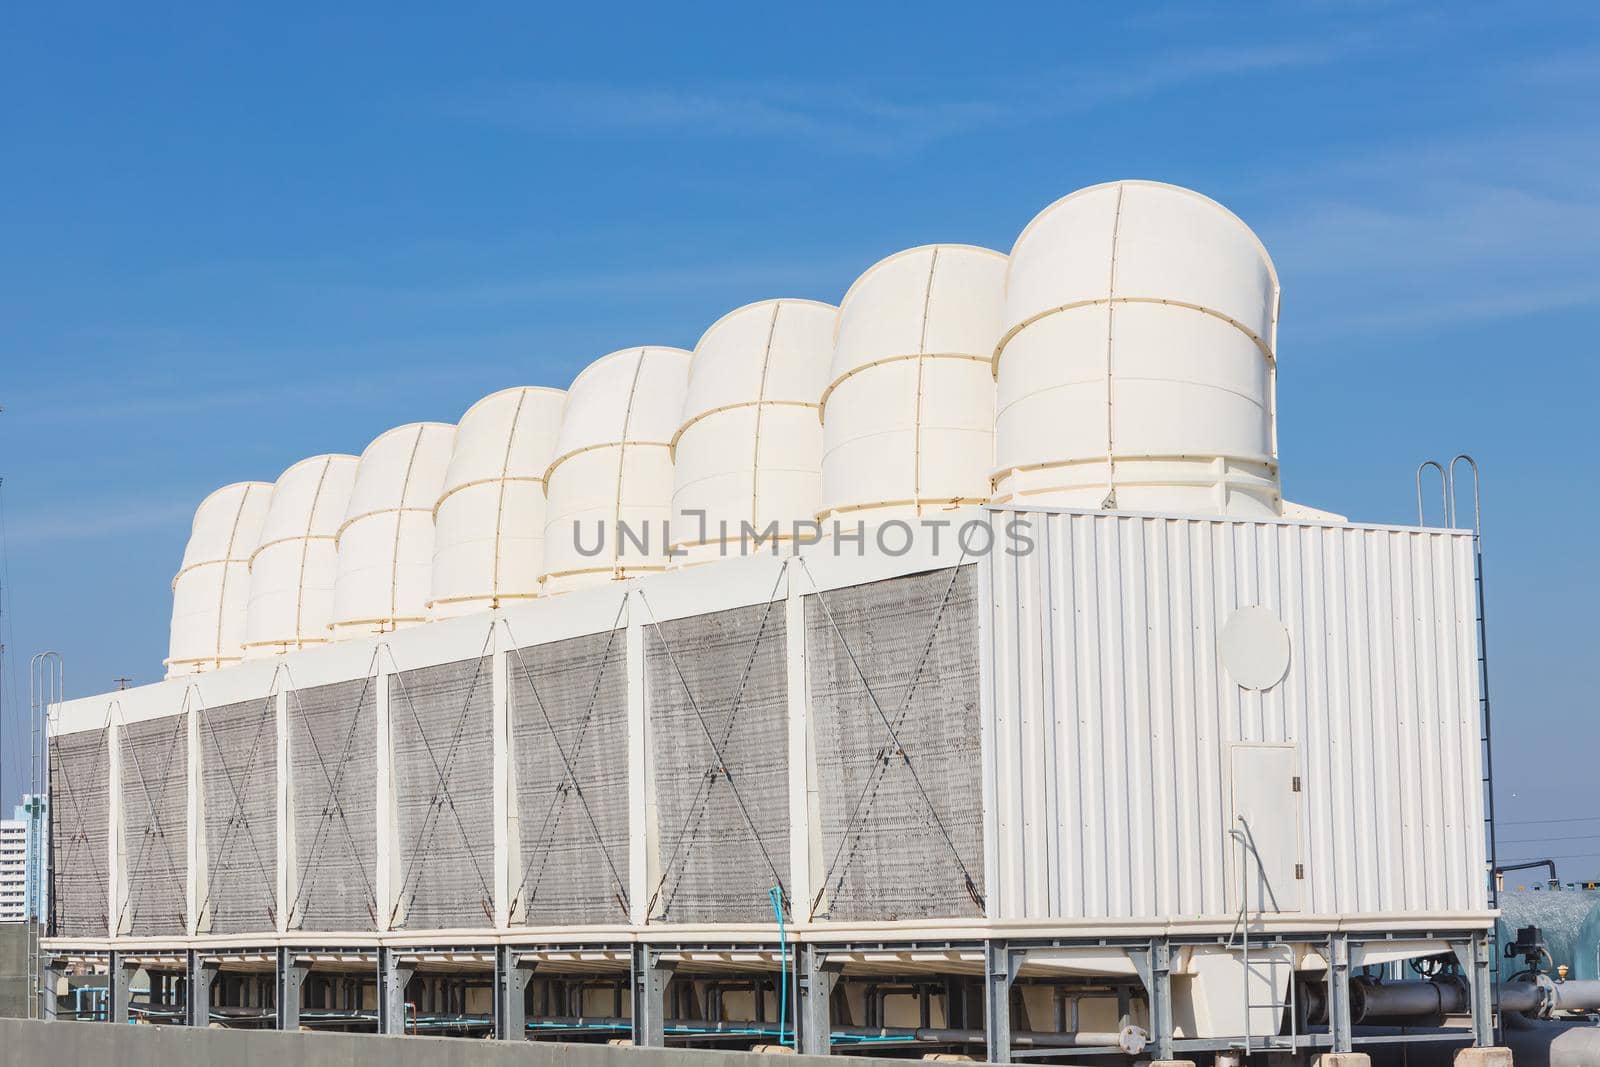 Air cooling tower for HVAC chilling units at building rooftop outdoor blue sky. by qualitystocks